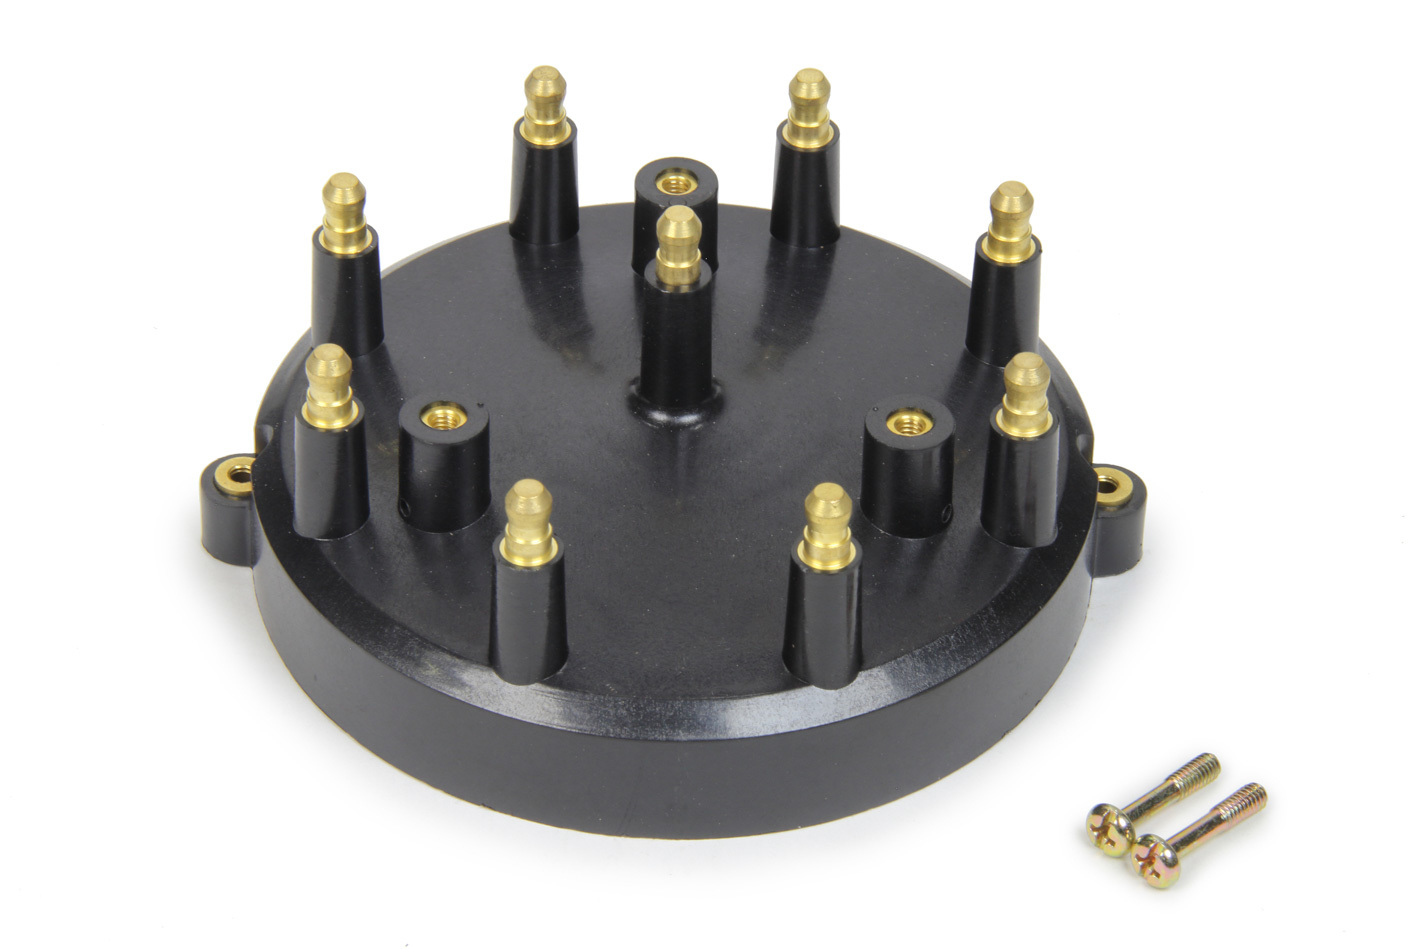 FAST 1000-1403 Distributor Cap, HEI Style Terminals, Brass Terminals, Screw Down, Black, Non-Vented, Oval Track Pro Race Distributor, Various Applications V8, Each